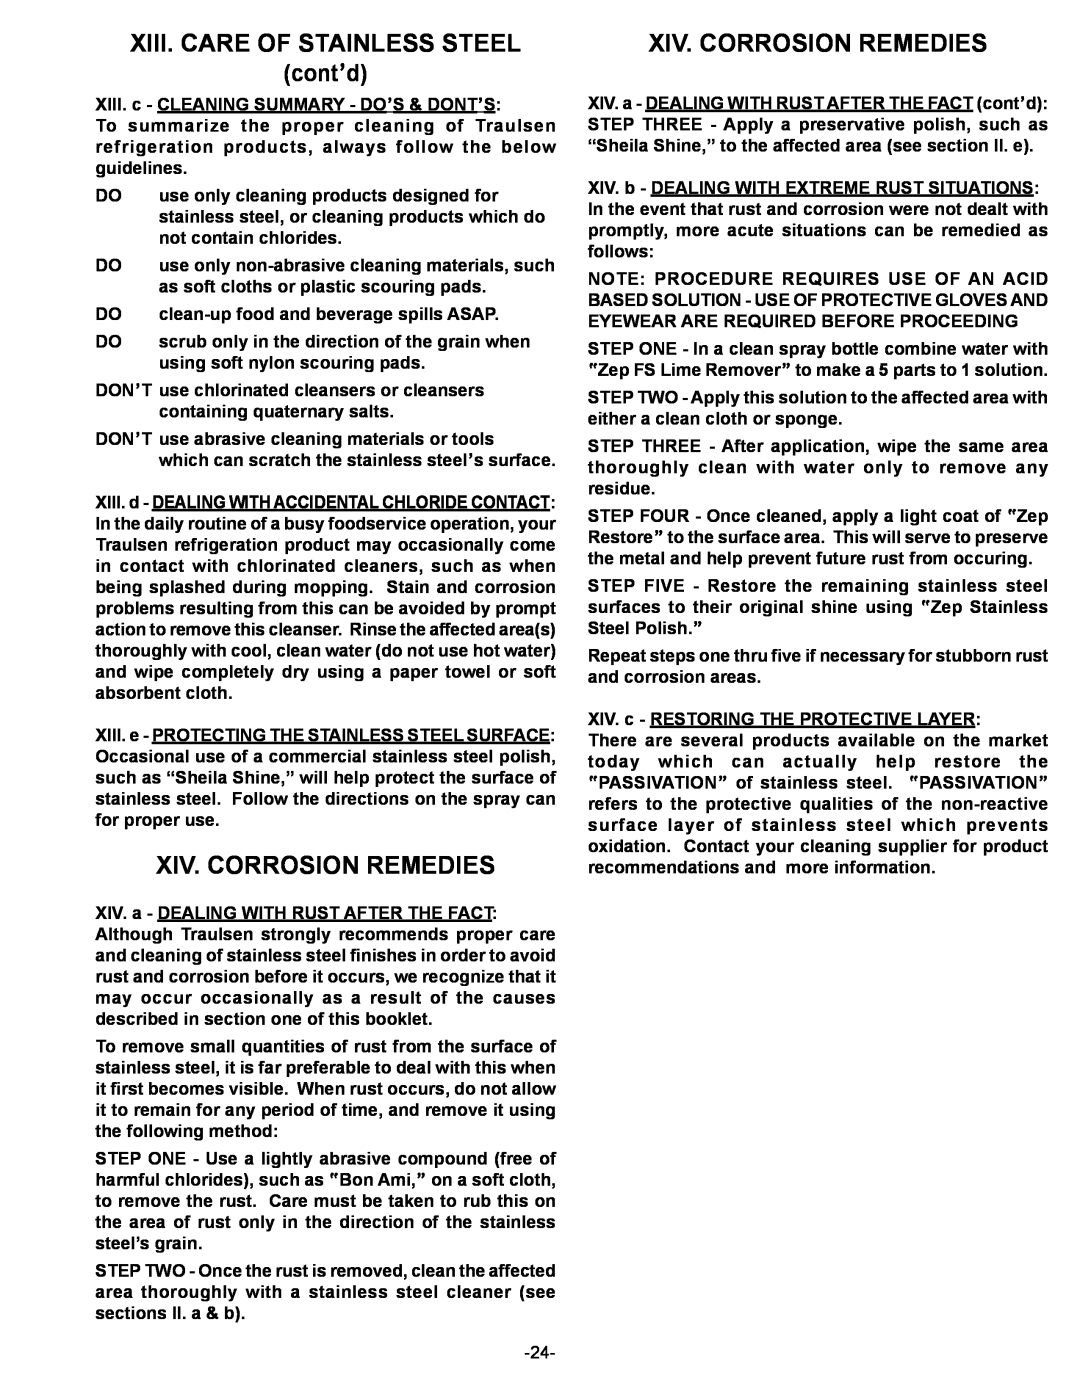 Traulsen R & A Series owner manual XIII. CARE OF STAINLESS STEEL cont’d, Xiv. Corrosion Remedies 